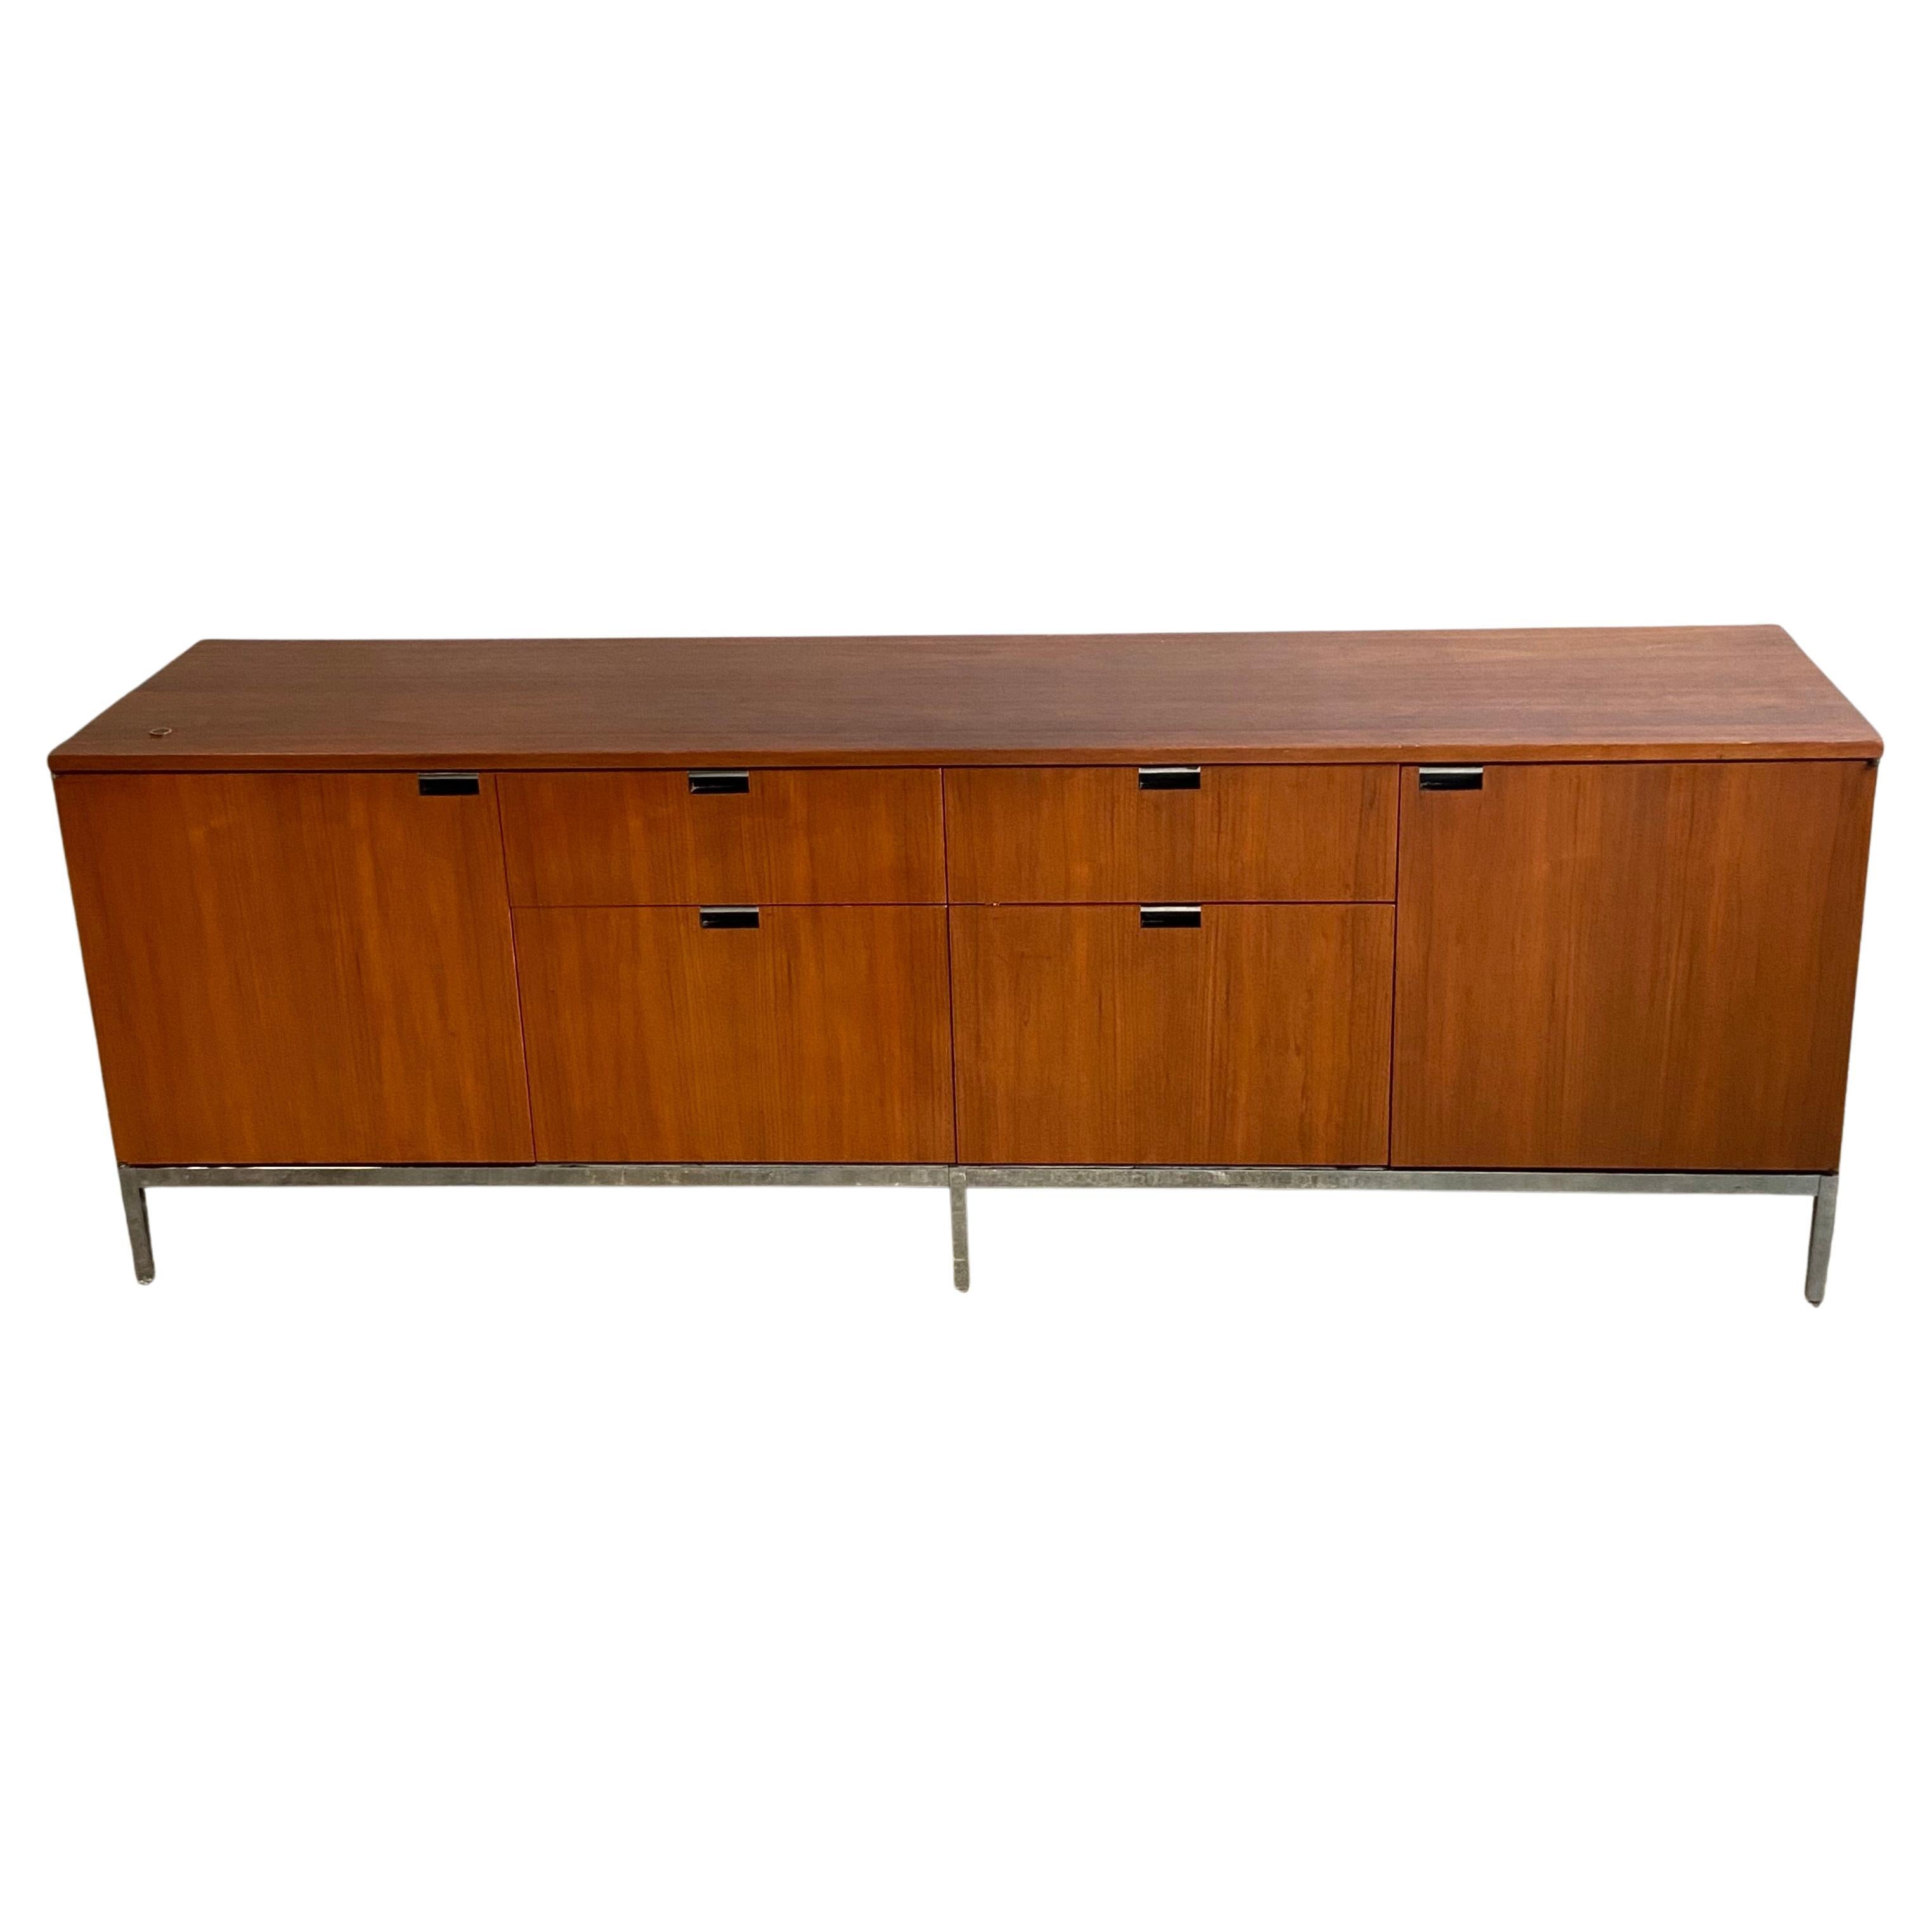 Midcentury Florence Knoll Credenza